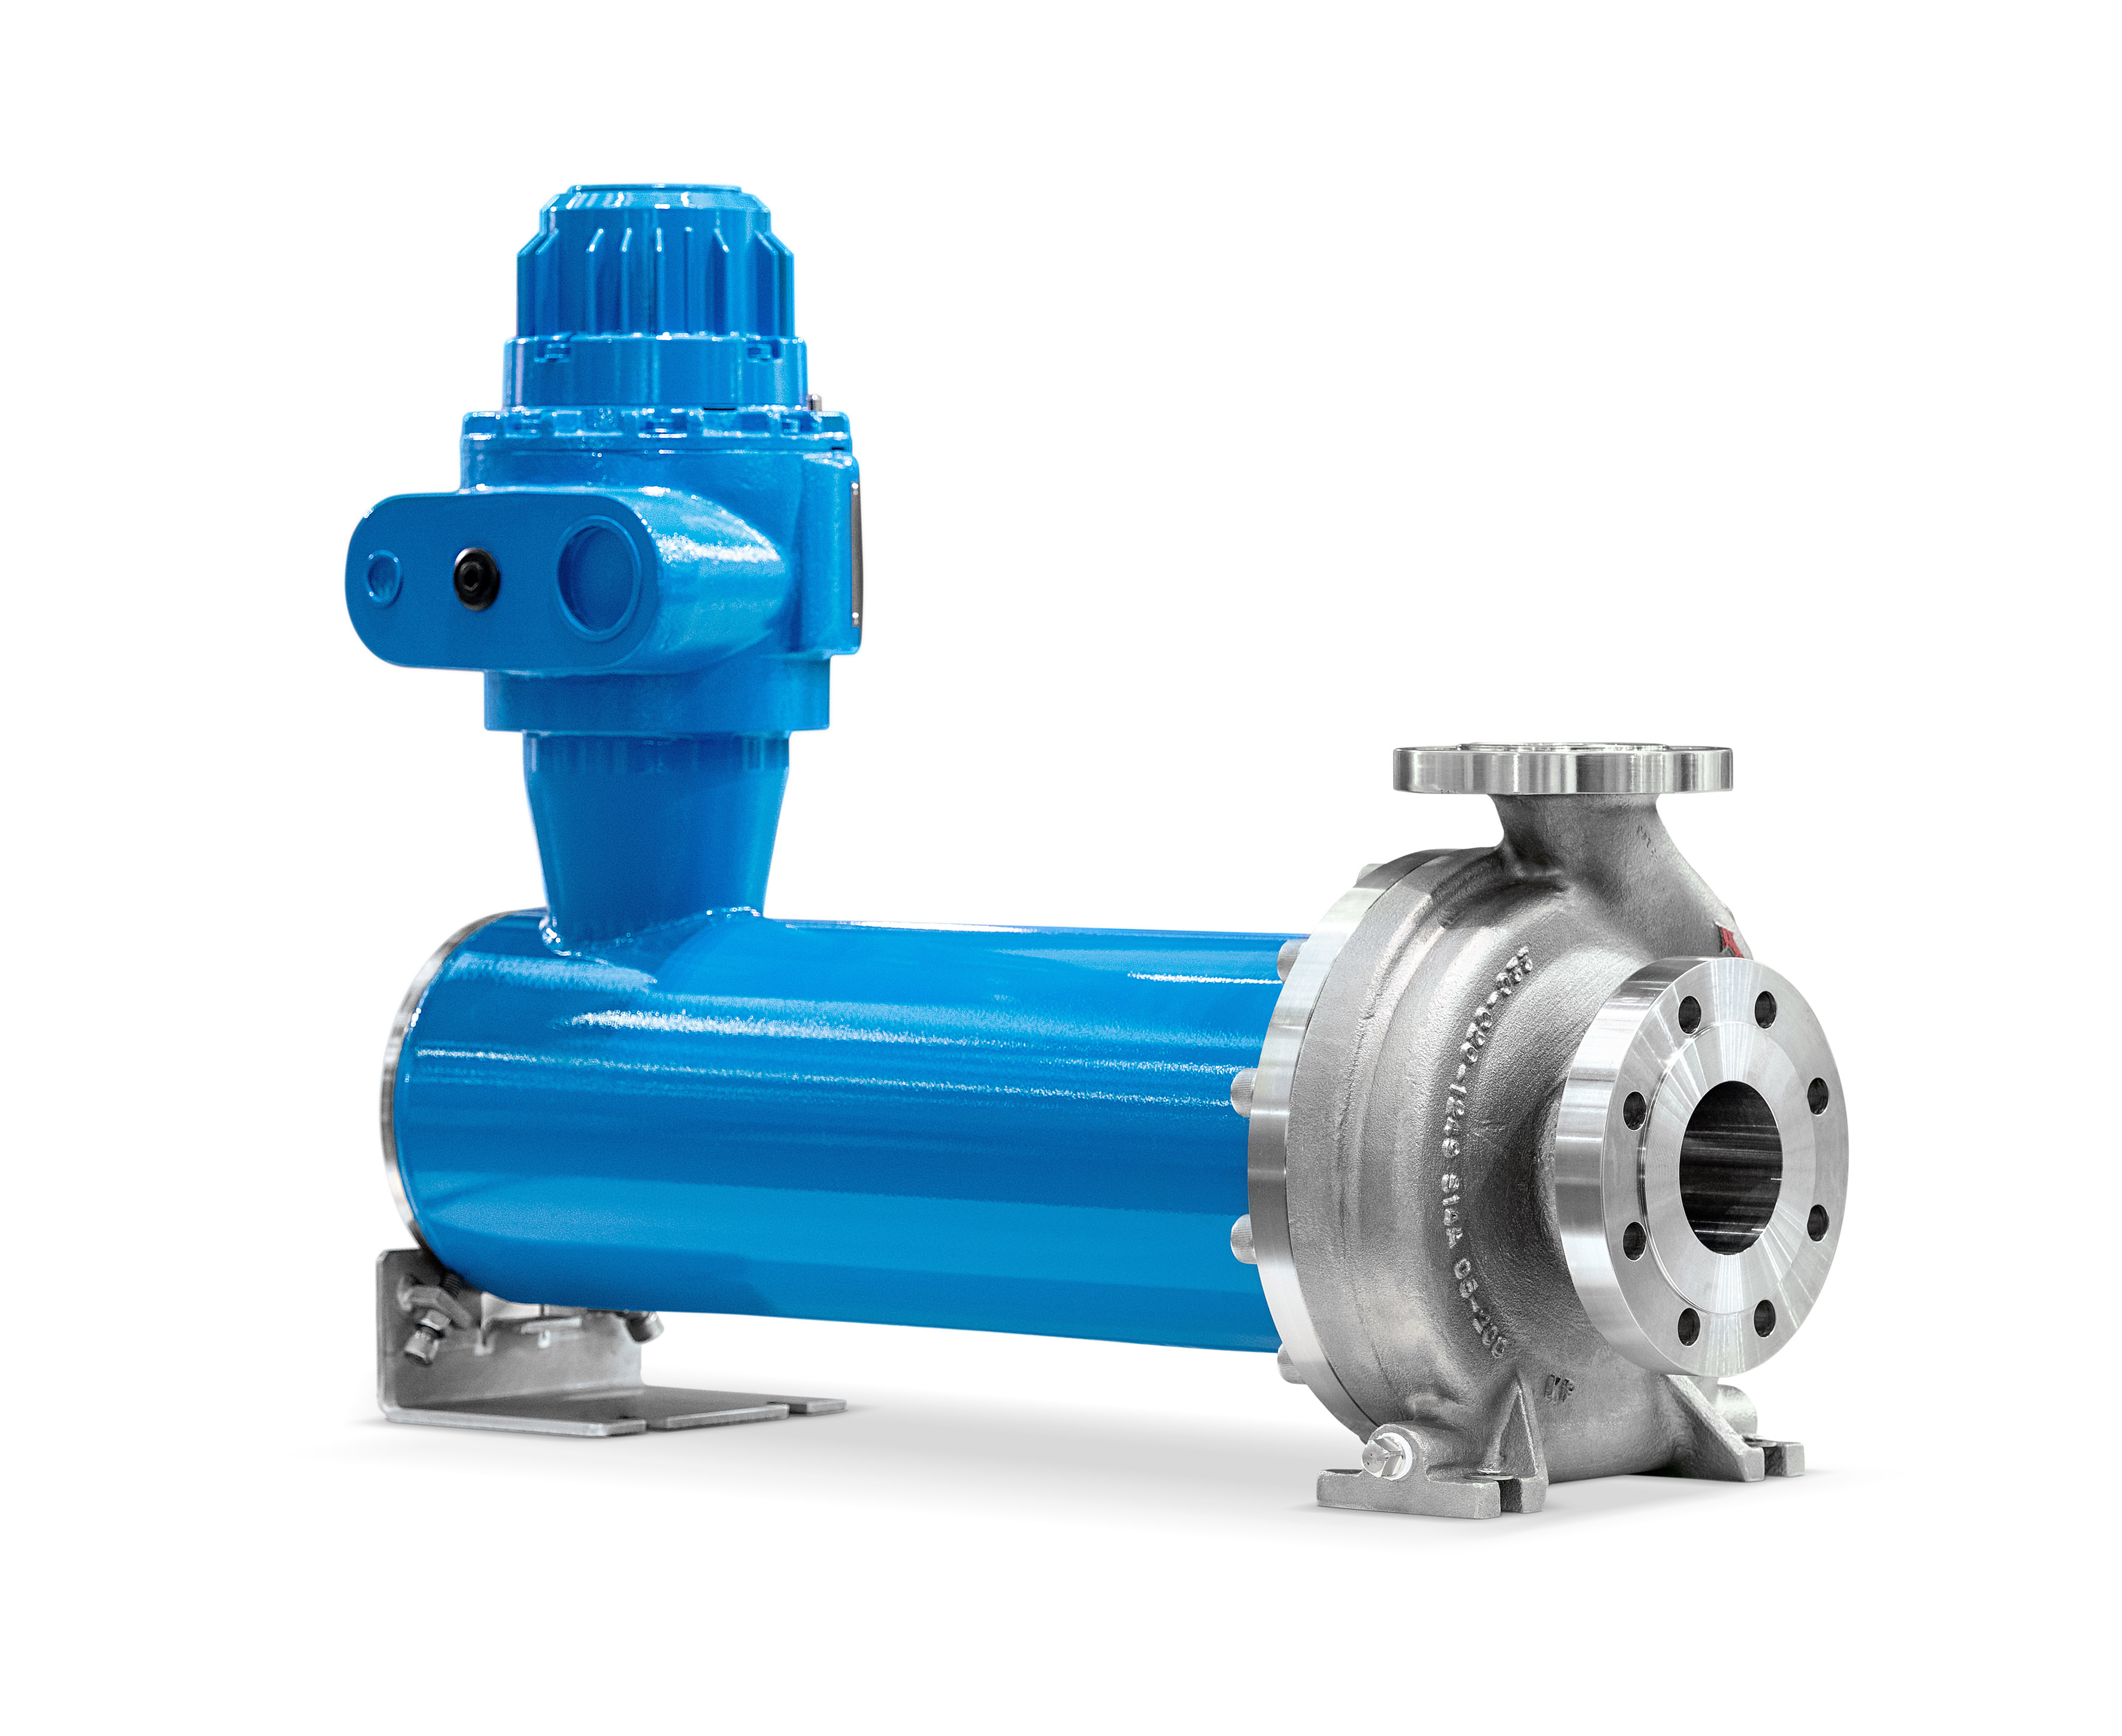 The NIKKISO Non-Seal centrifugal canned motor pumps became available from January 2019.